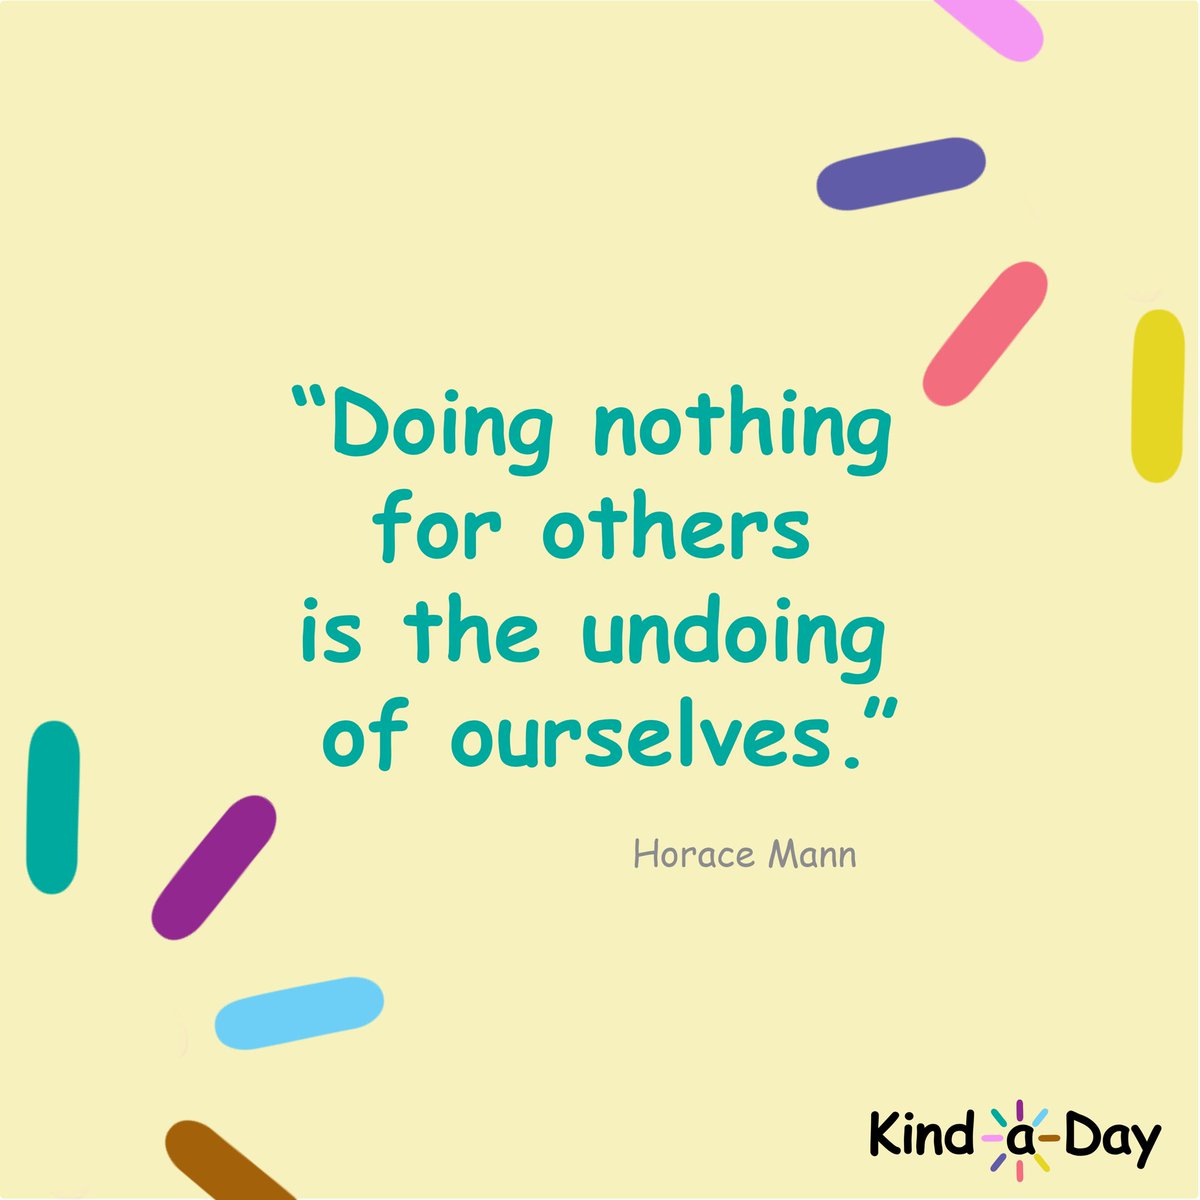 “Doing nothing for others is the undoing of ourselves.” – Horace Mann
 
#Volunteer #VolunteerMonth #NationalVolunteerMonth #HelpOthers #HoraceMann #HoraceMannQuotes #BeKind #kind #kindness #KindLife #SpreadKindness #KindnessMatters #ChooseKindness #KindnessWins #KindaDay